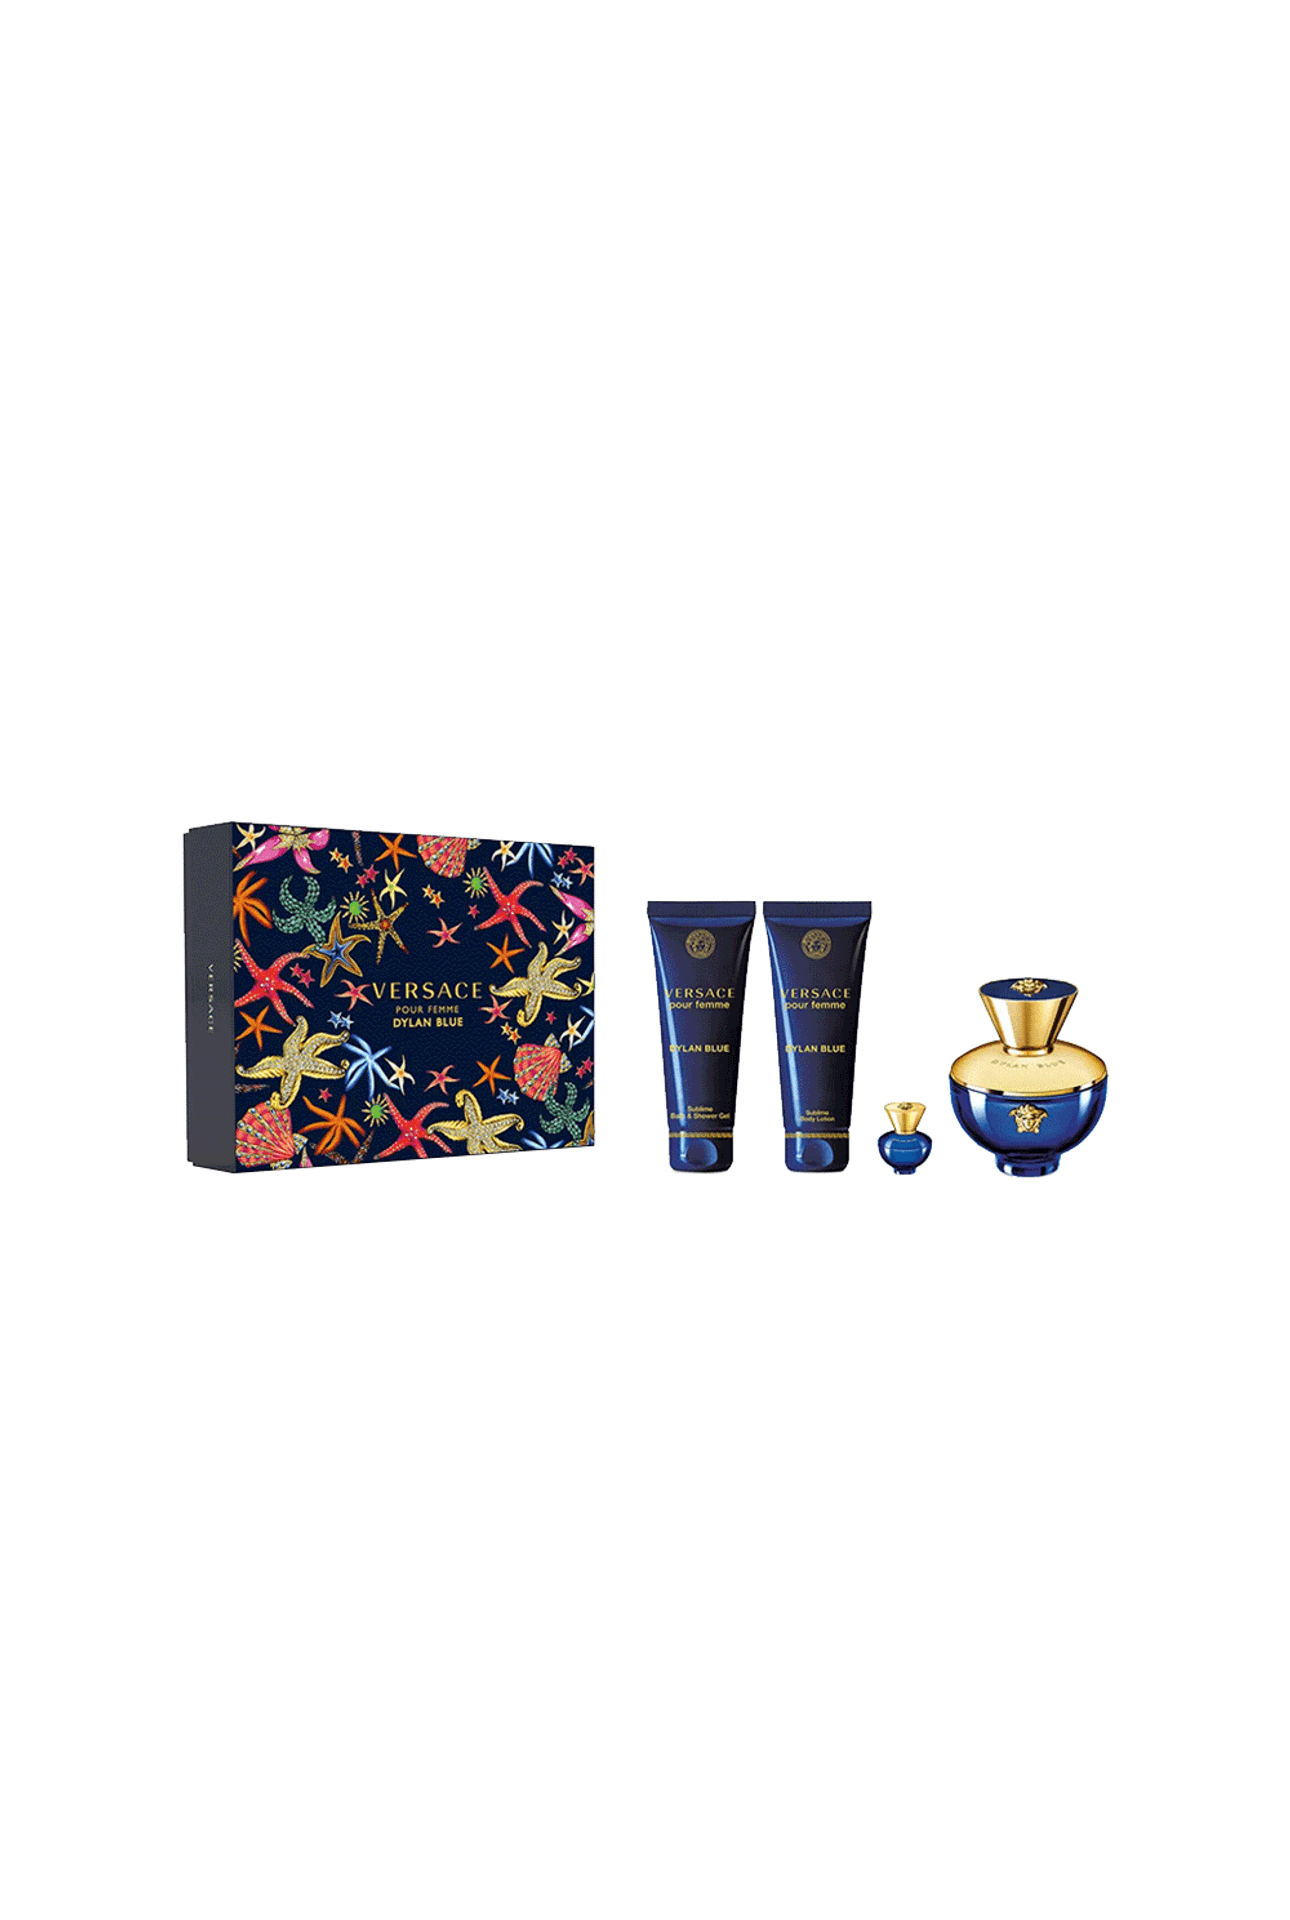 Versace-Set-Versace-Dylan-Blue-Edt-x-100-ml---5-ml---Body-Lotion---S-8011003879182_img1